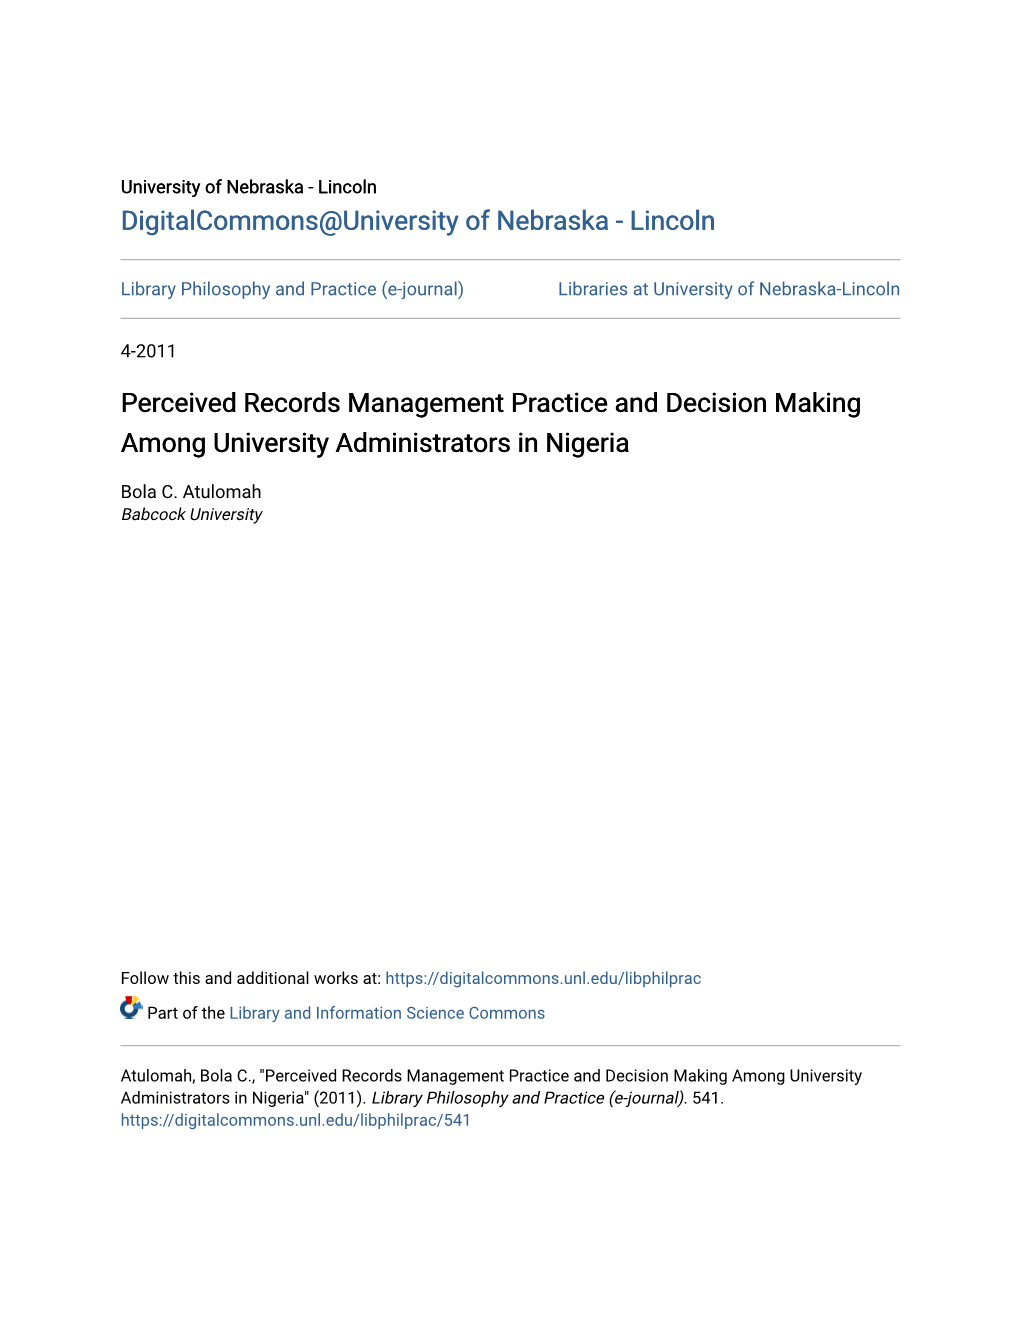 Perceived Records Management Practice and Decision Making Among University Administrators in Nigeria